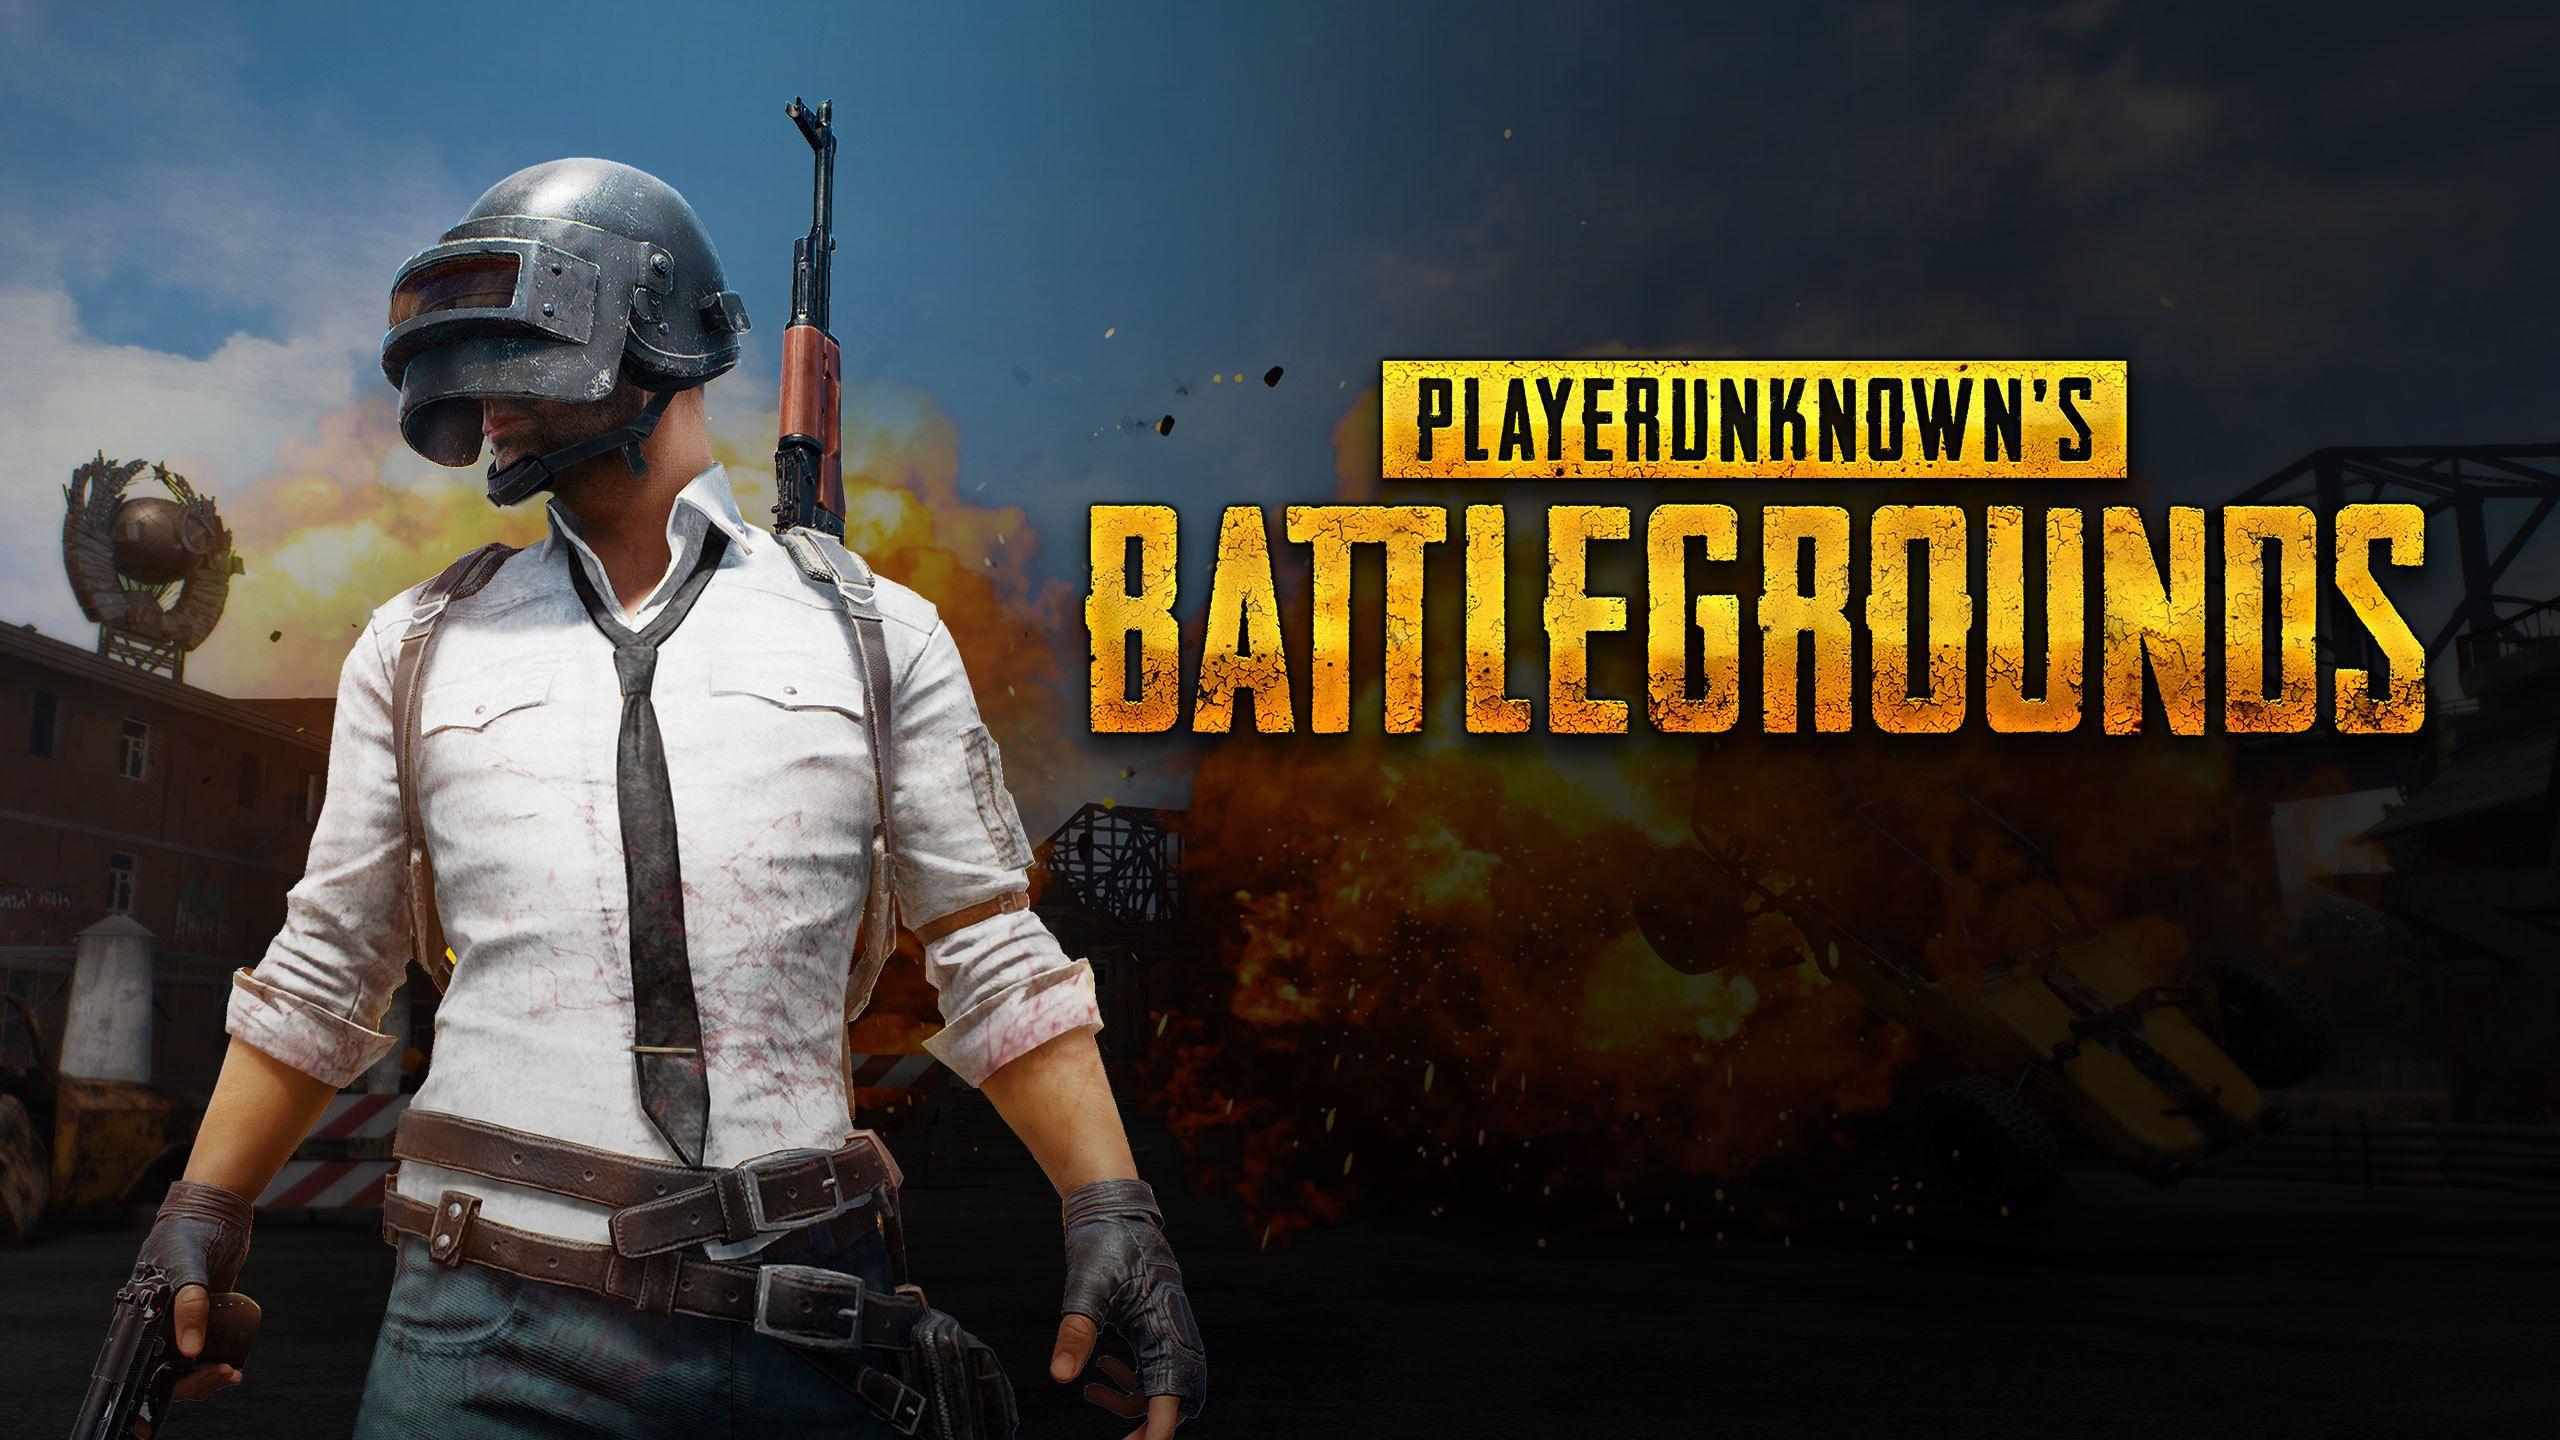 PLAYERUNKNOWN'S BATTLEGROUNDS Wallpaper, Picture, Image